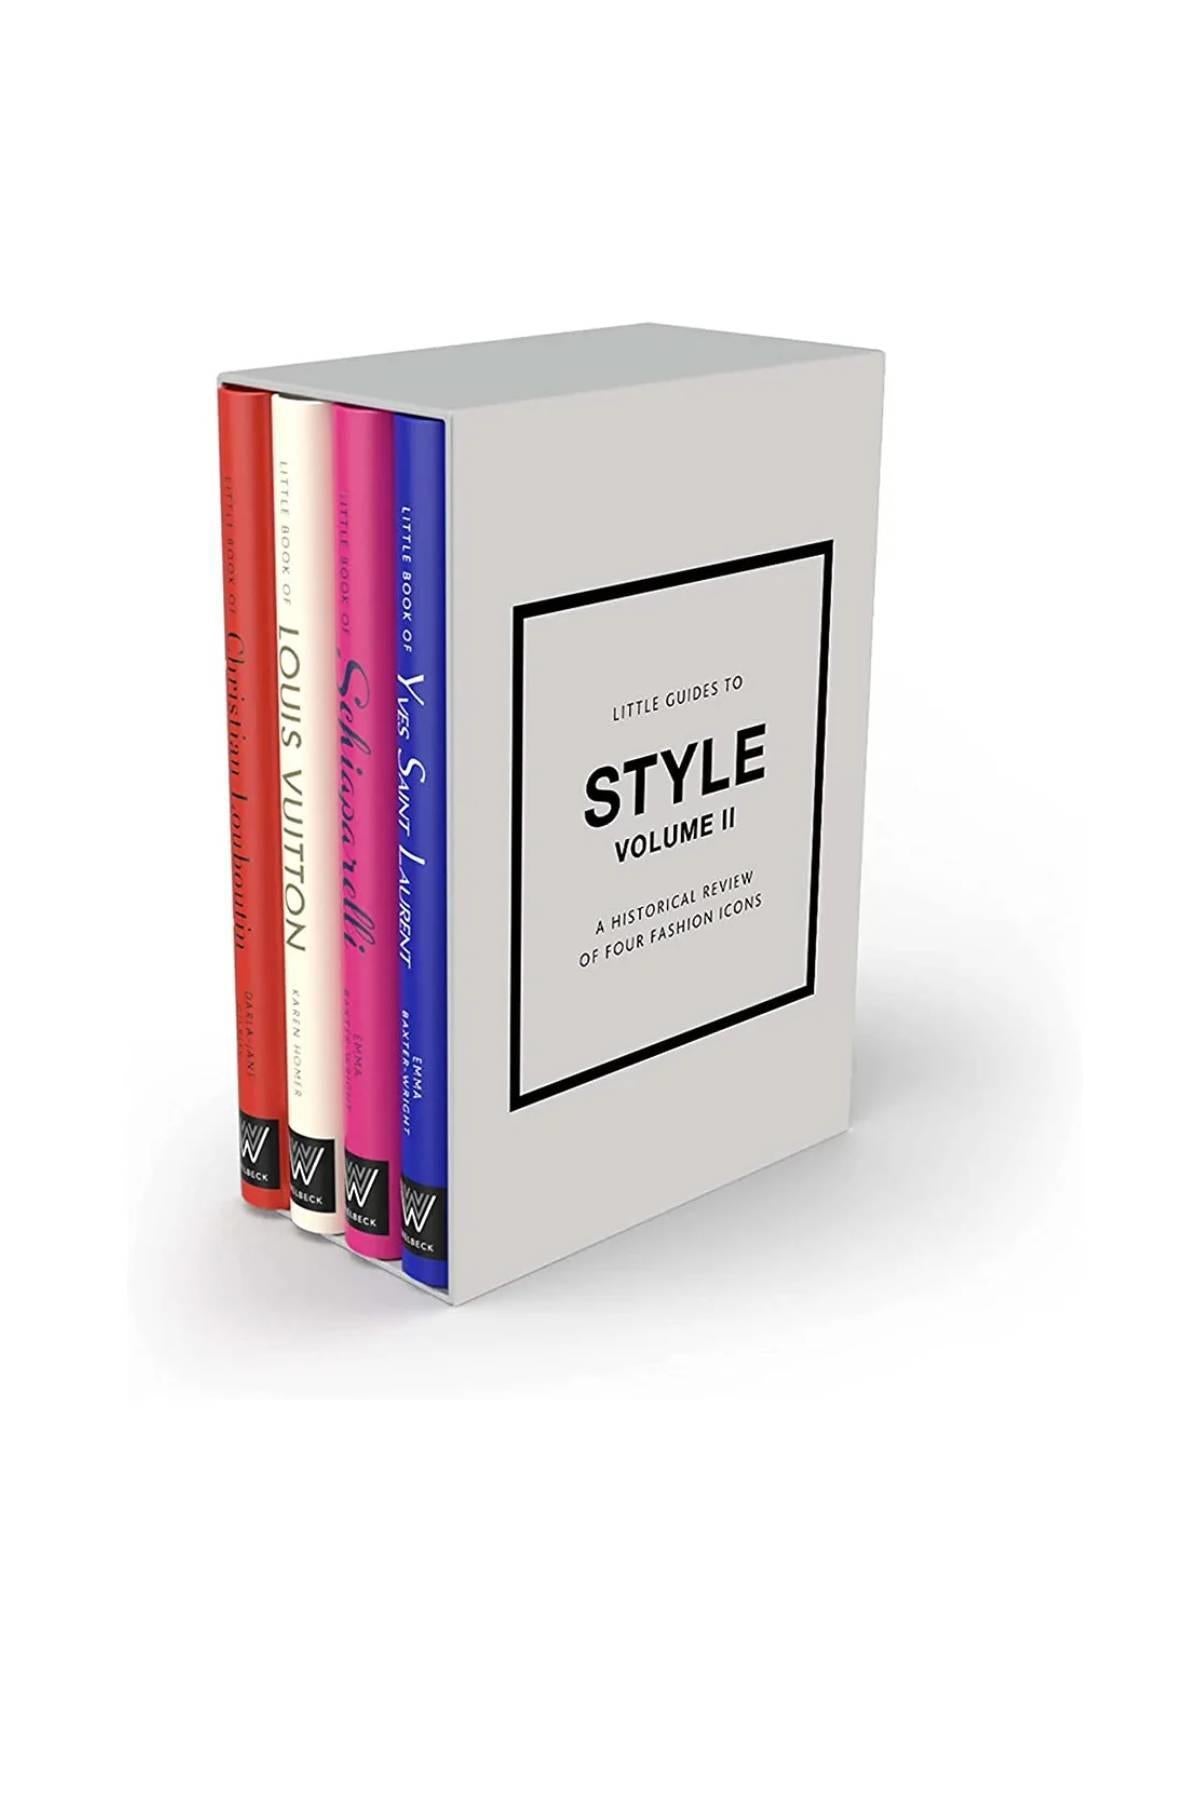 Little Guides To Style II Kitap